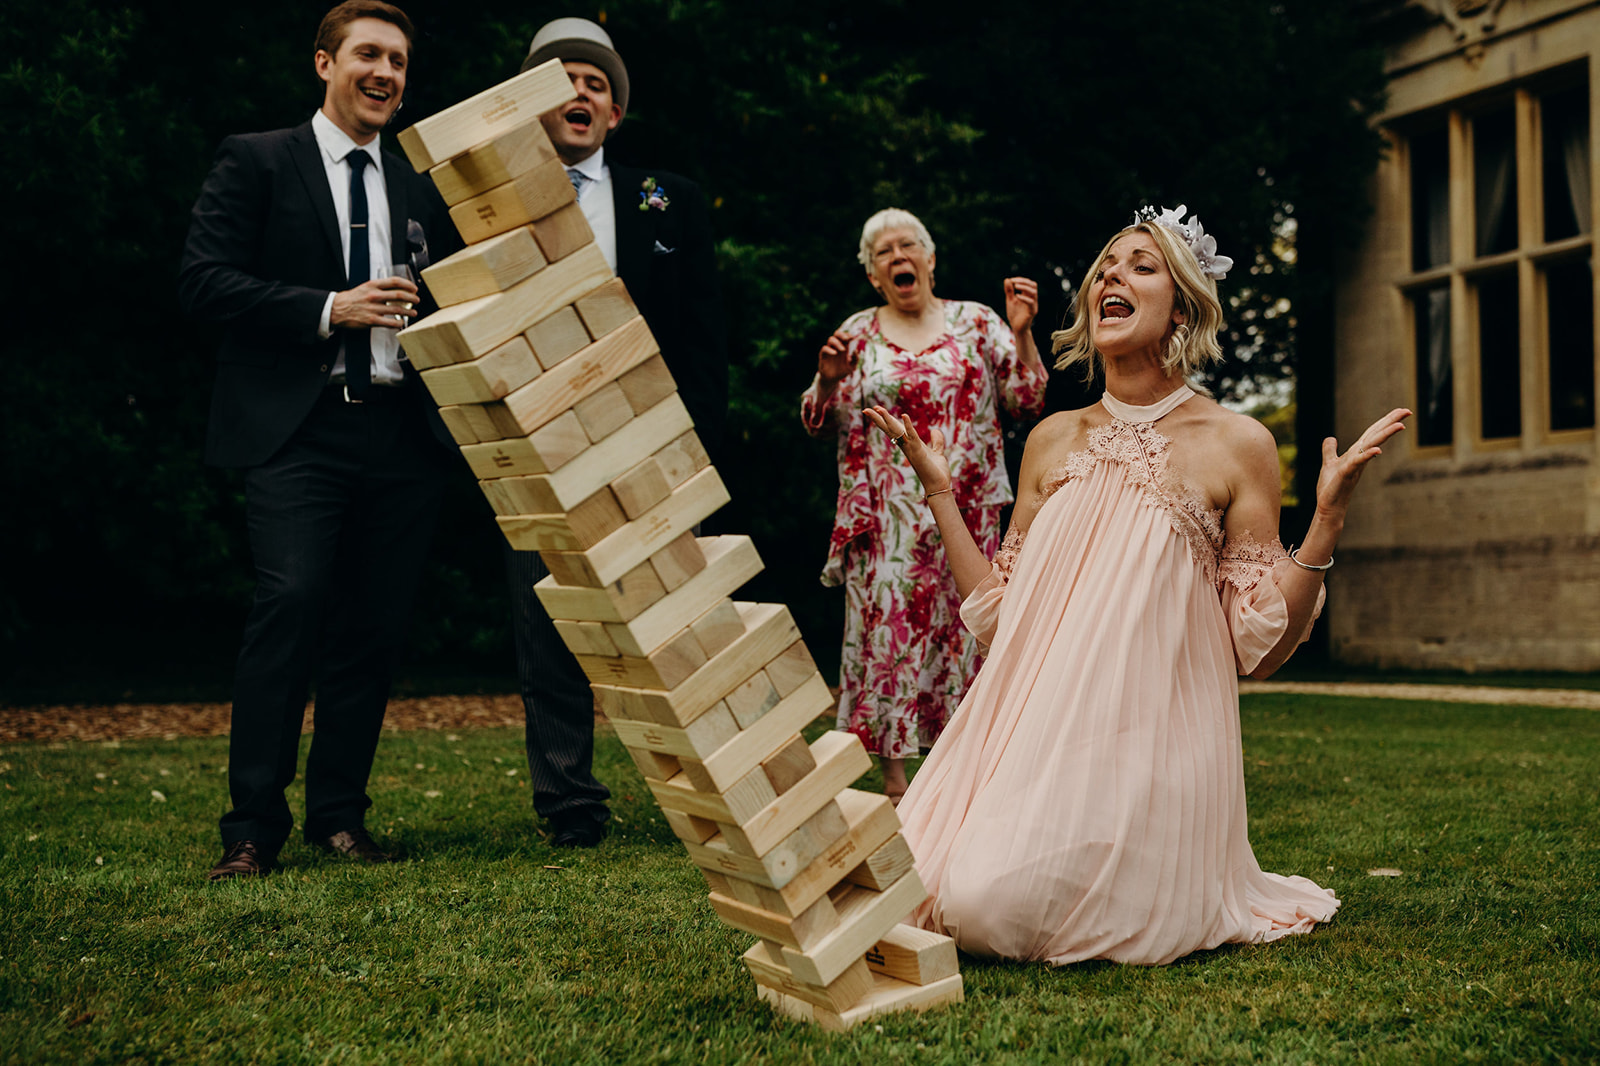 Woman in pink laughs as giant Jenga tower falls during drinks reception, guests laugh in background 